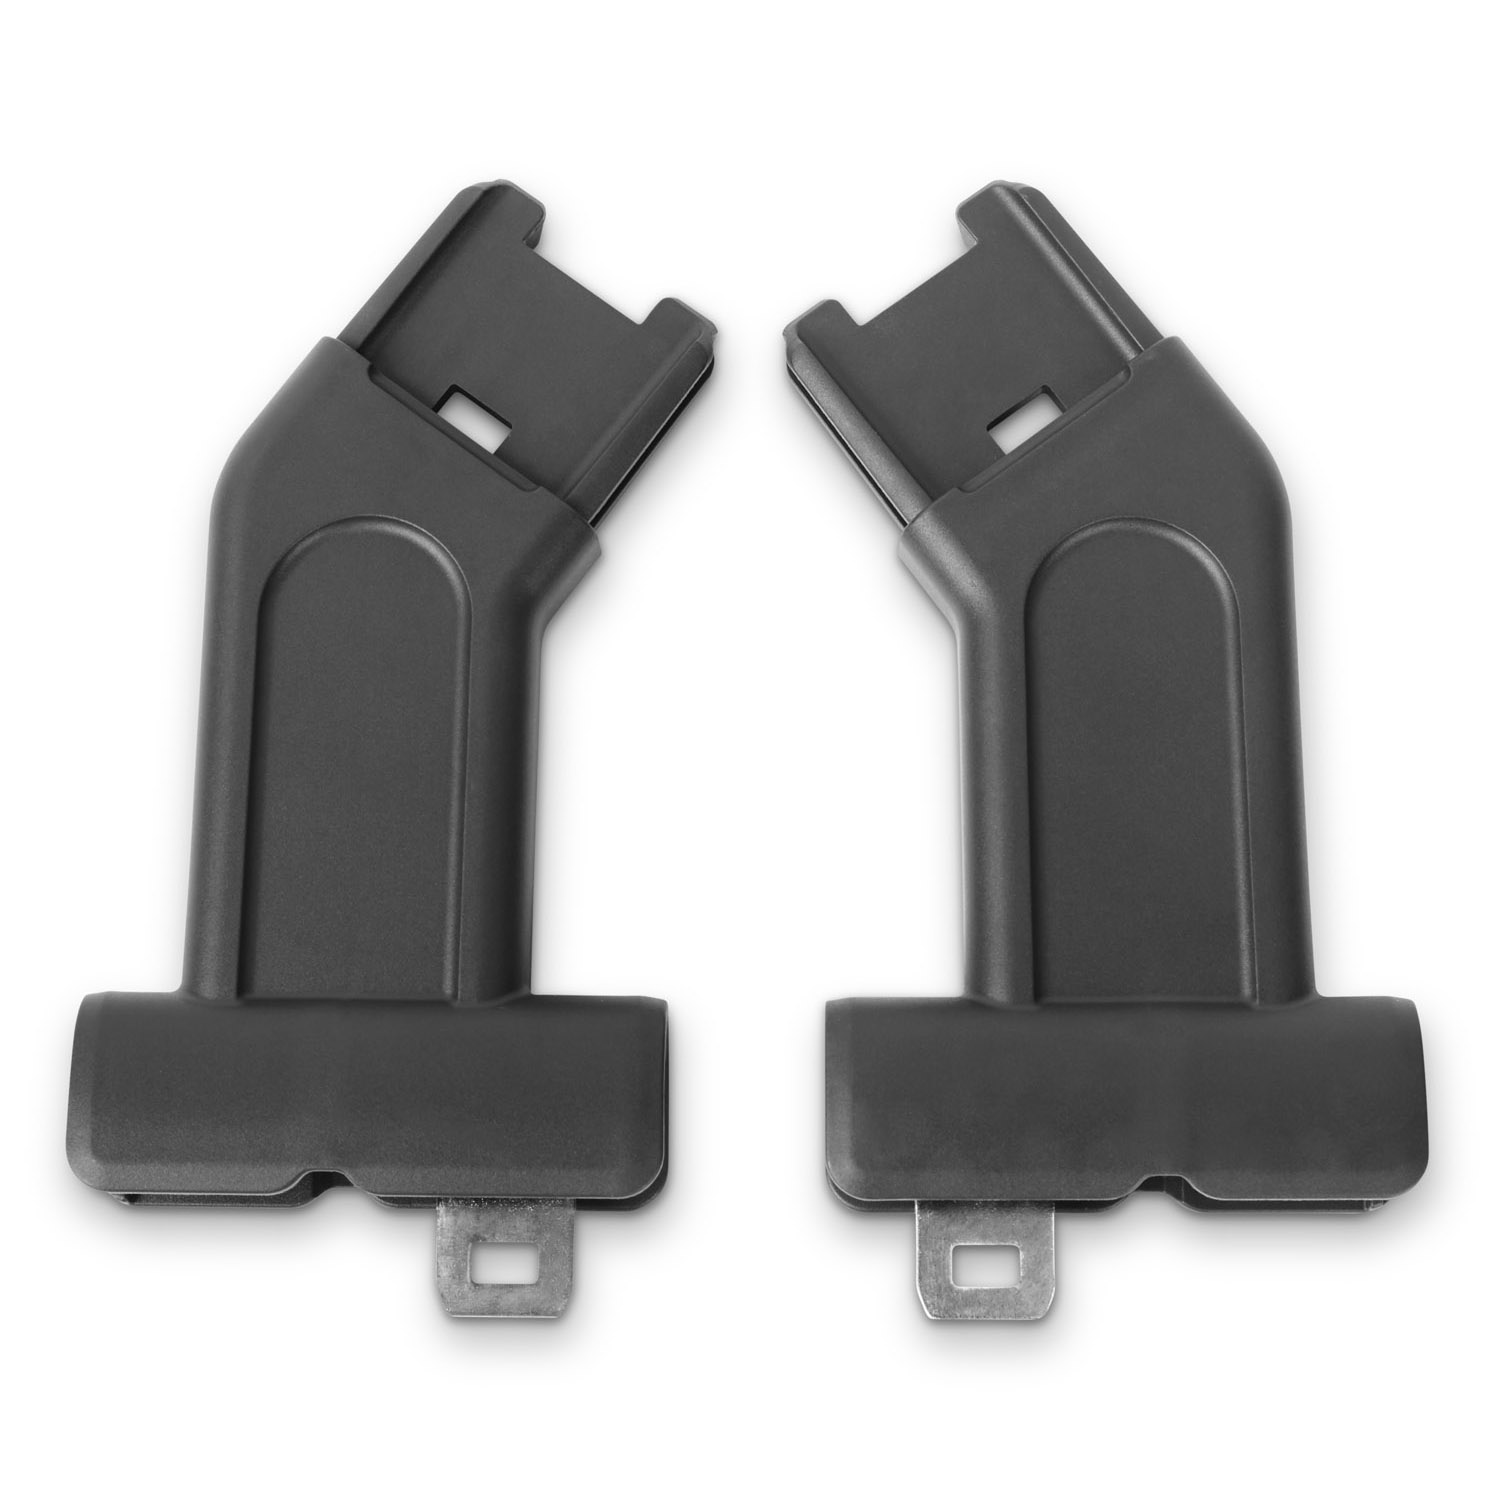 UPPAbaby Ridge Adapters for MESA i-Size and Carrycot